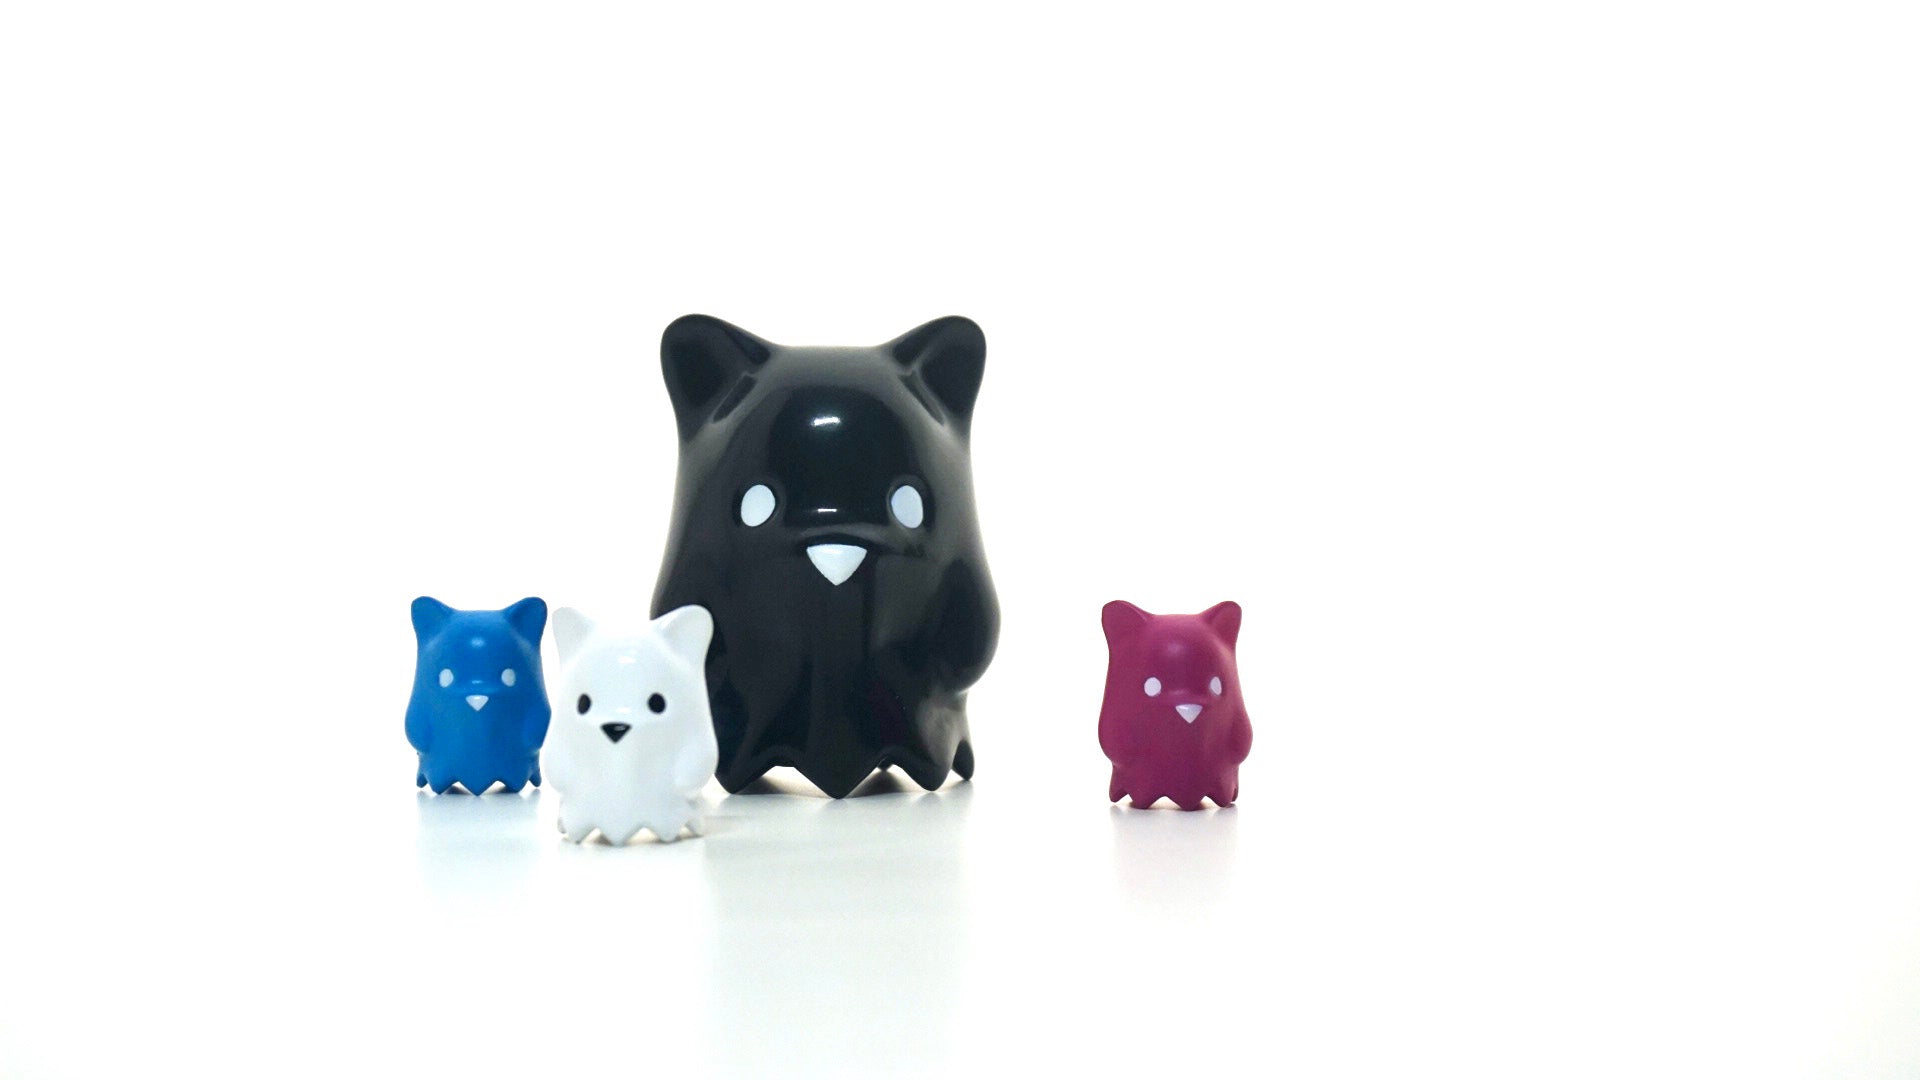 A group of small animal figures including a purple bear, white ceramic animal, black and white cat statue, and blue toy animal.